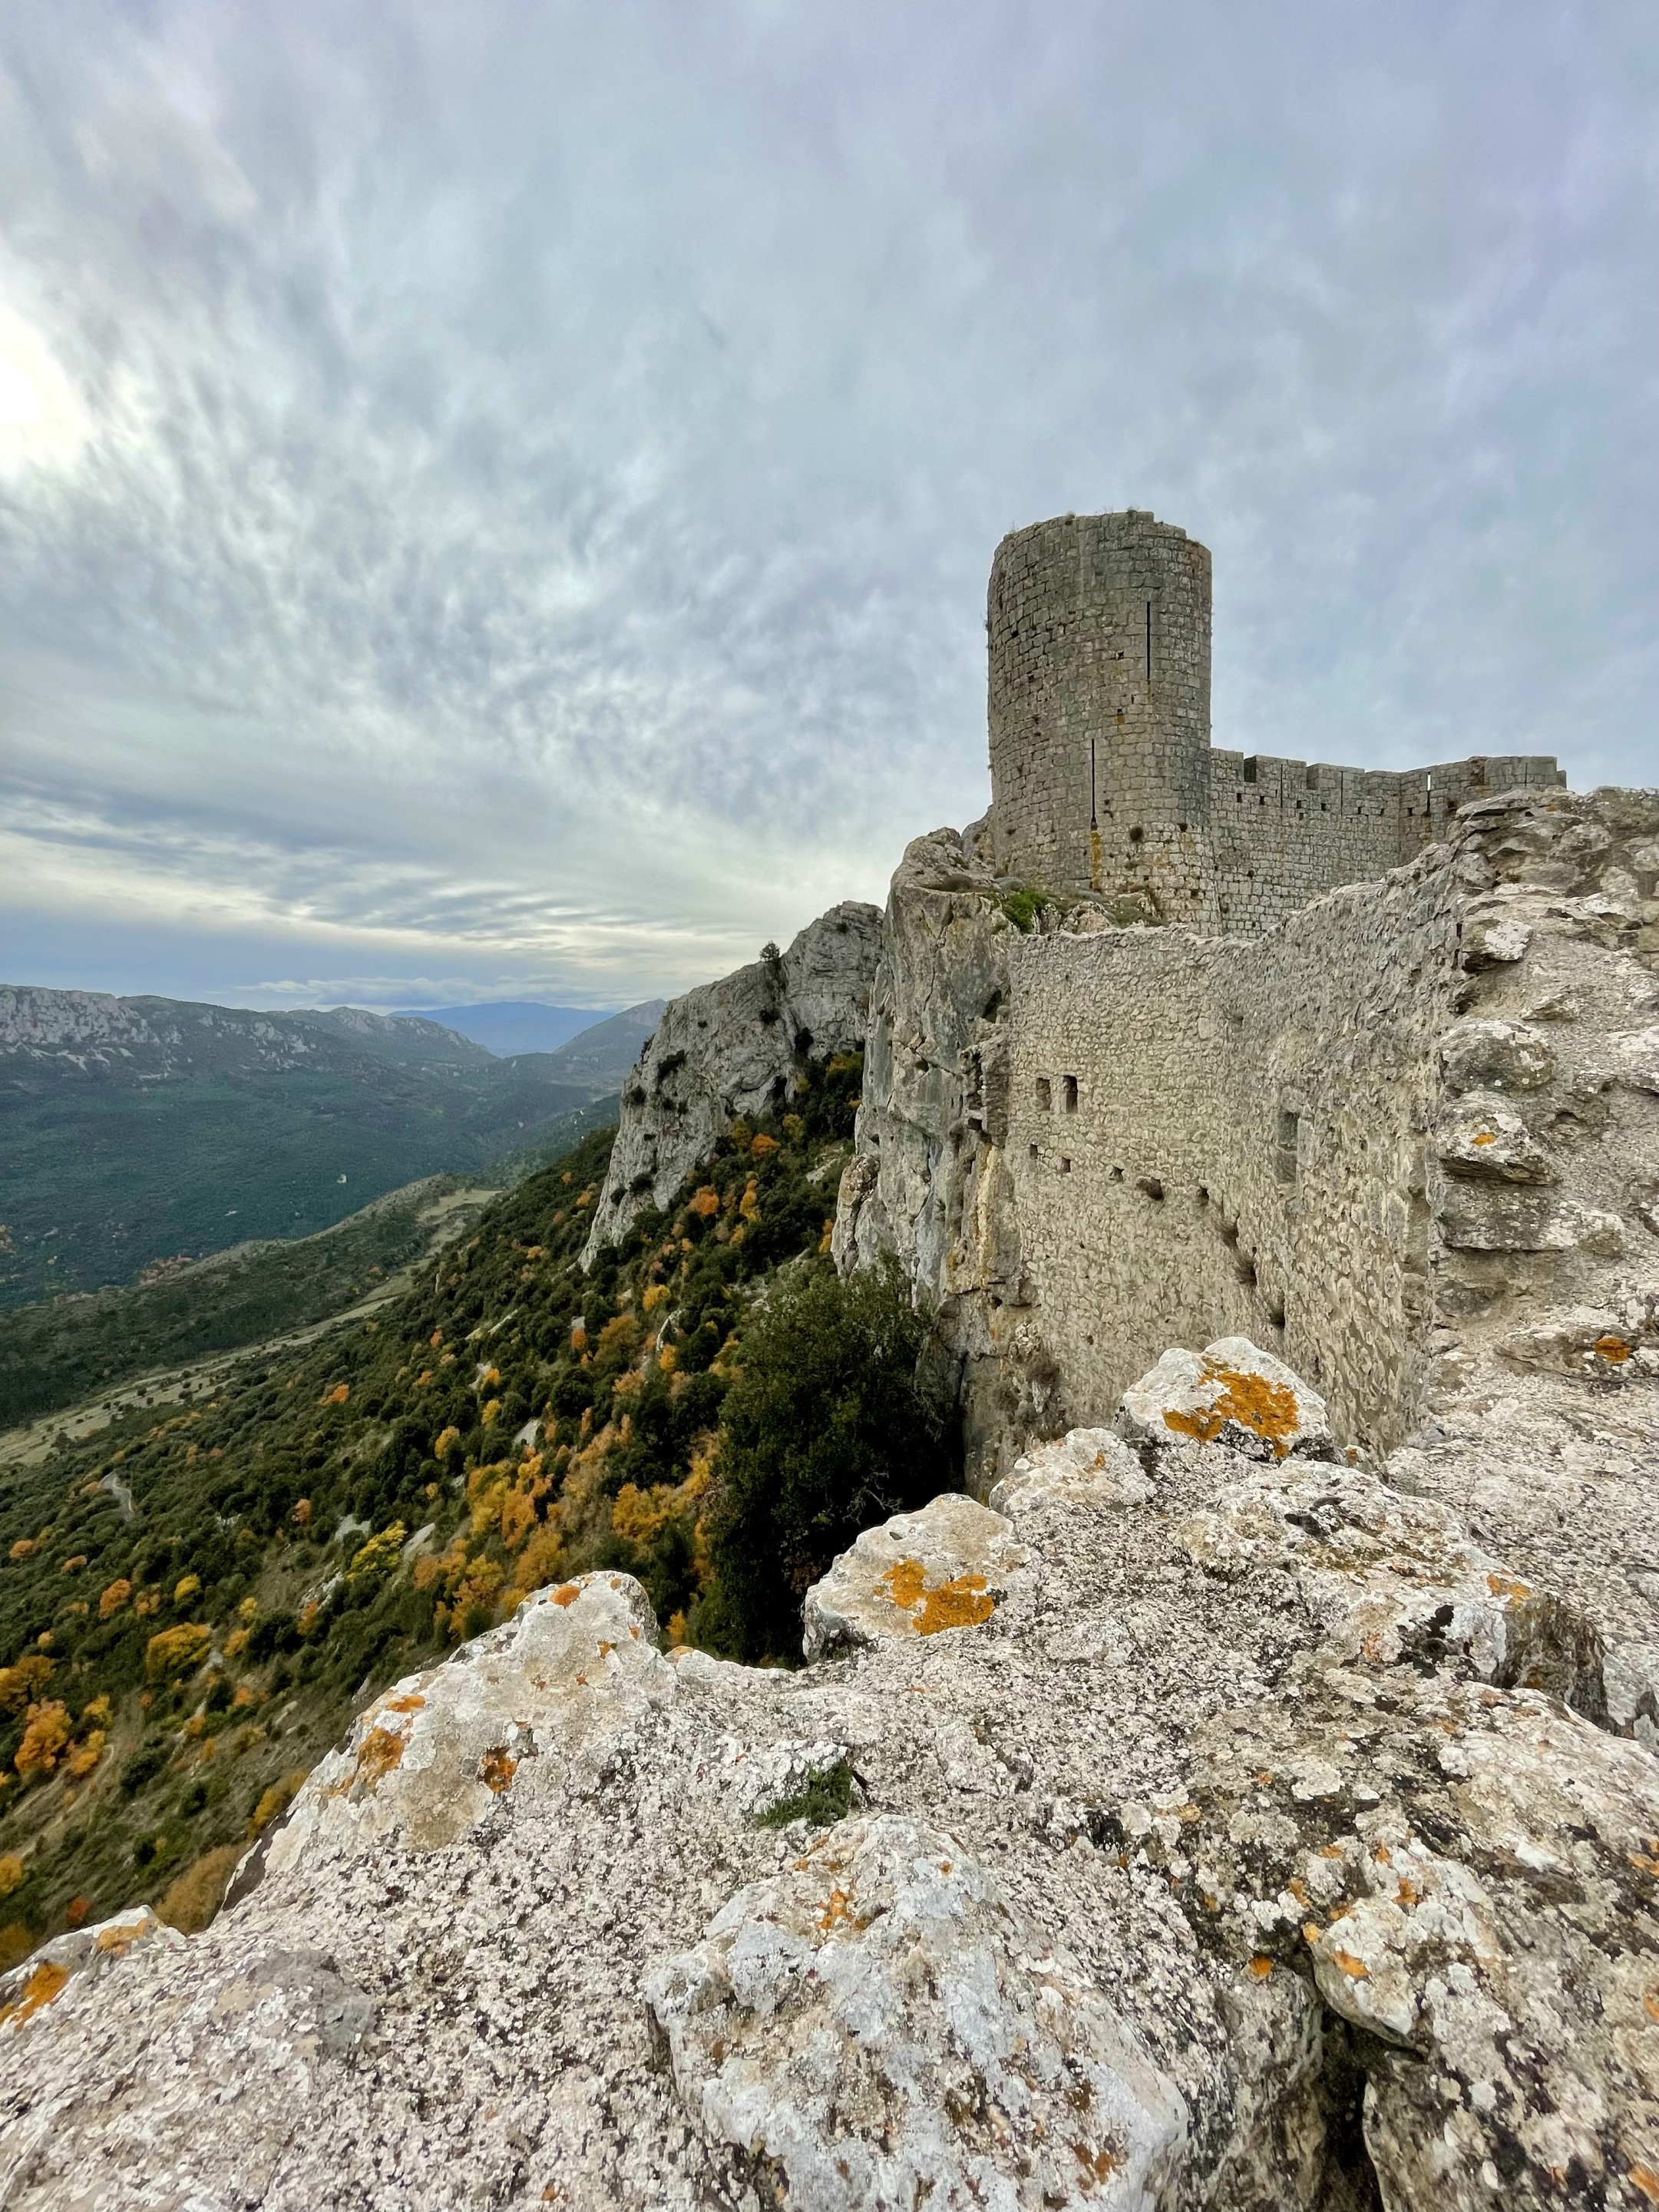 Cathar country